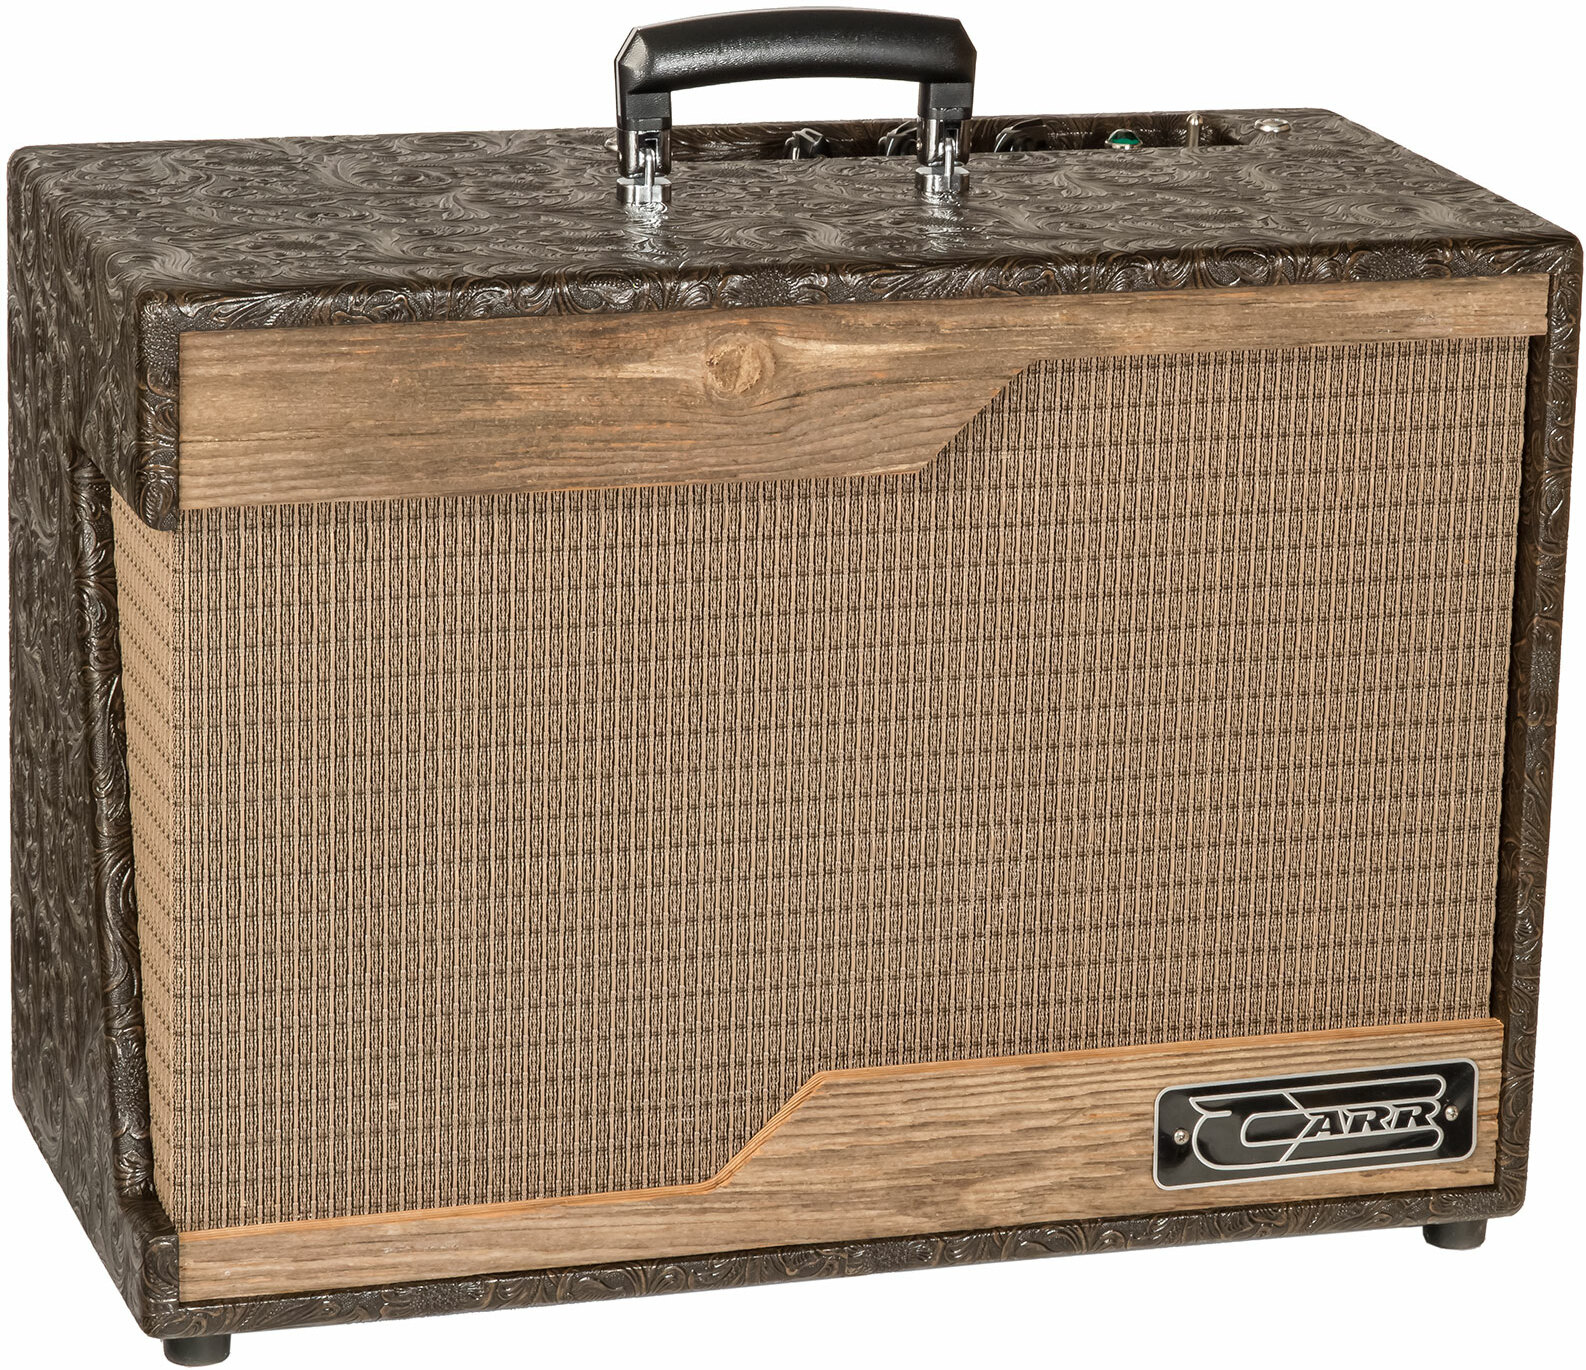 Carr Amplifiers Raleigh 1-12 Combo 5w 1x12 El84 Barn Panels - Electric guitar combo amp - Main picture